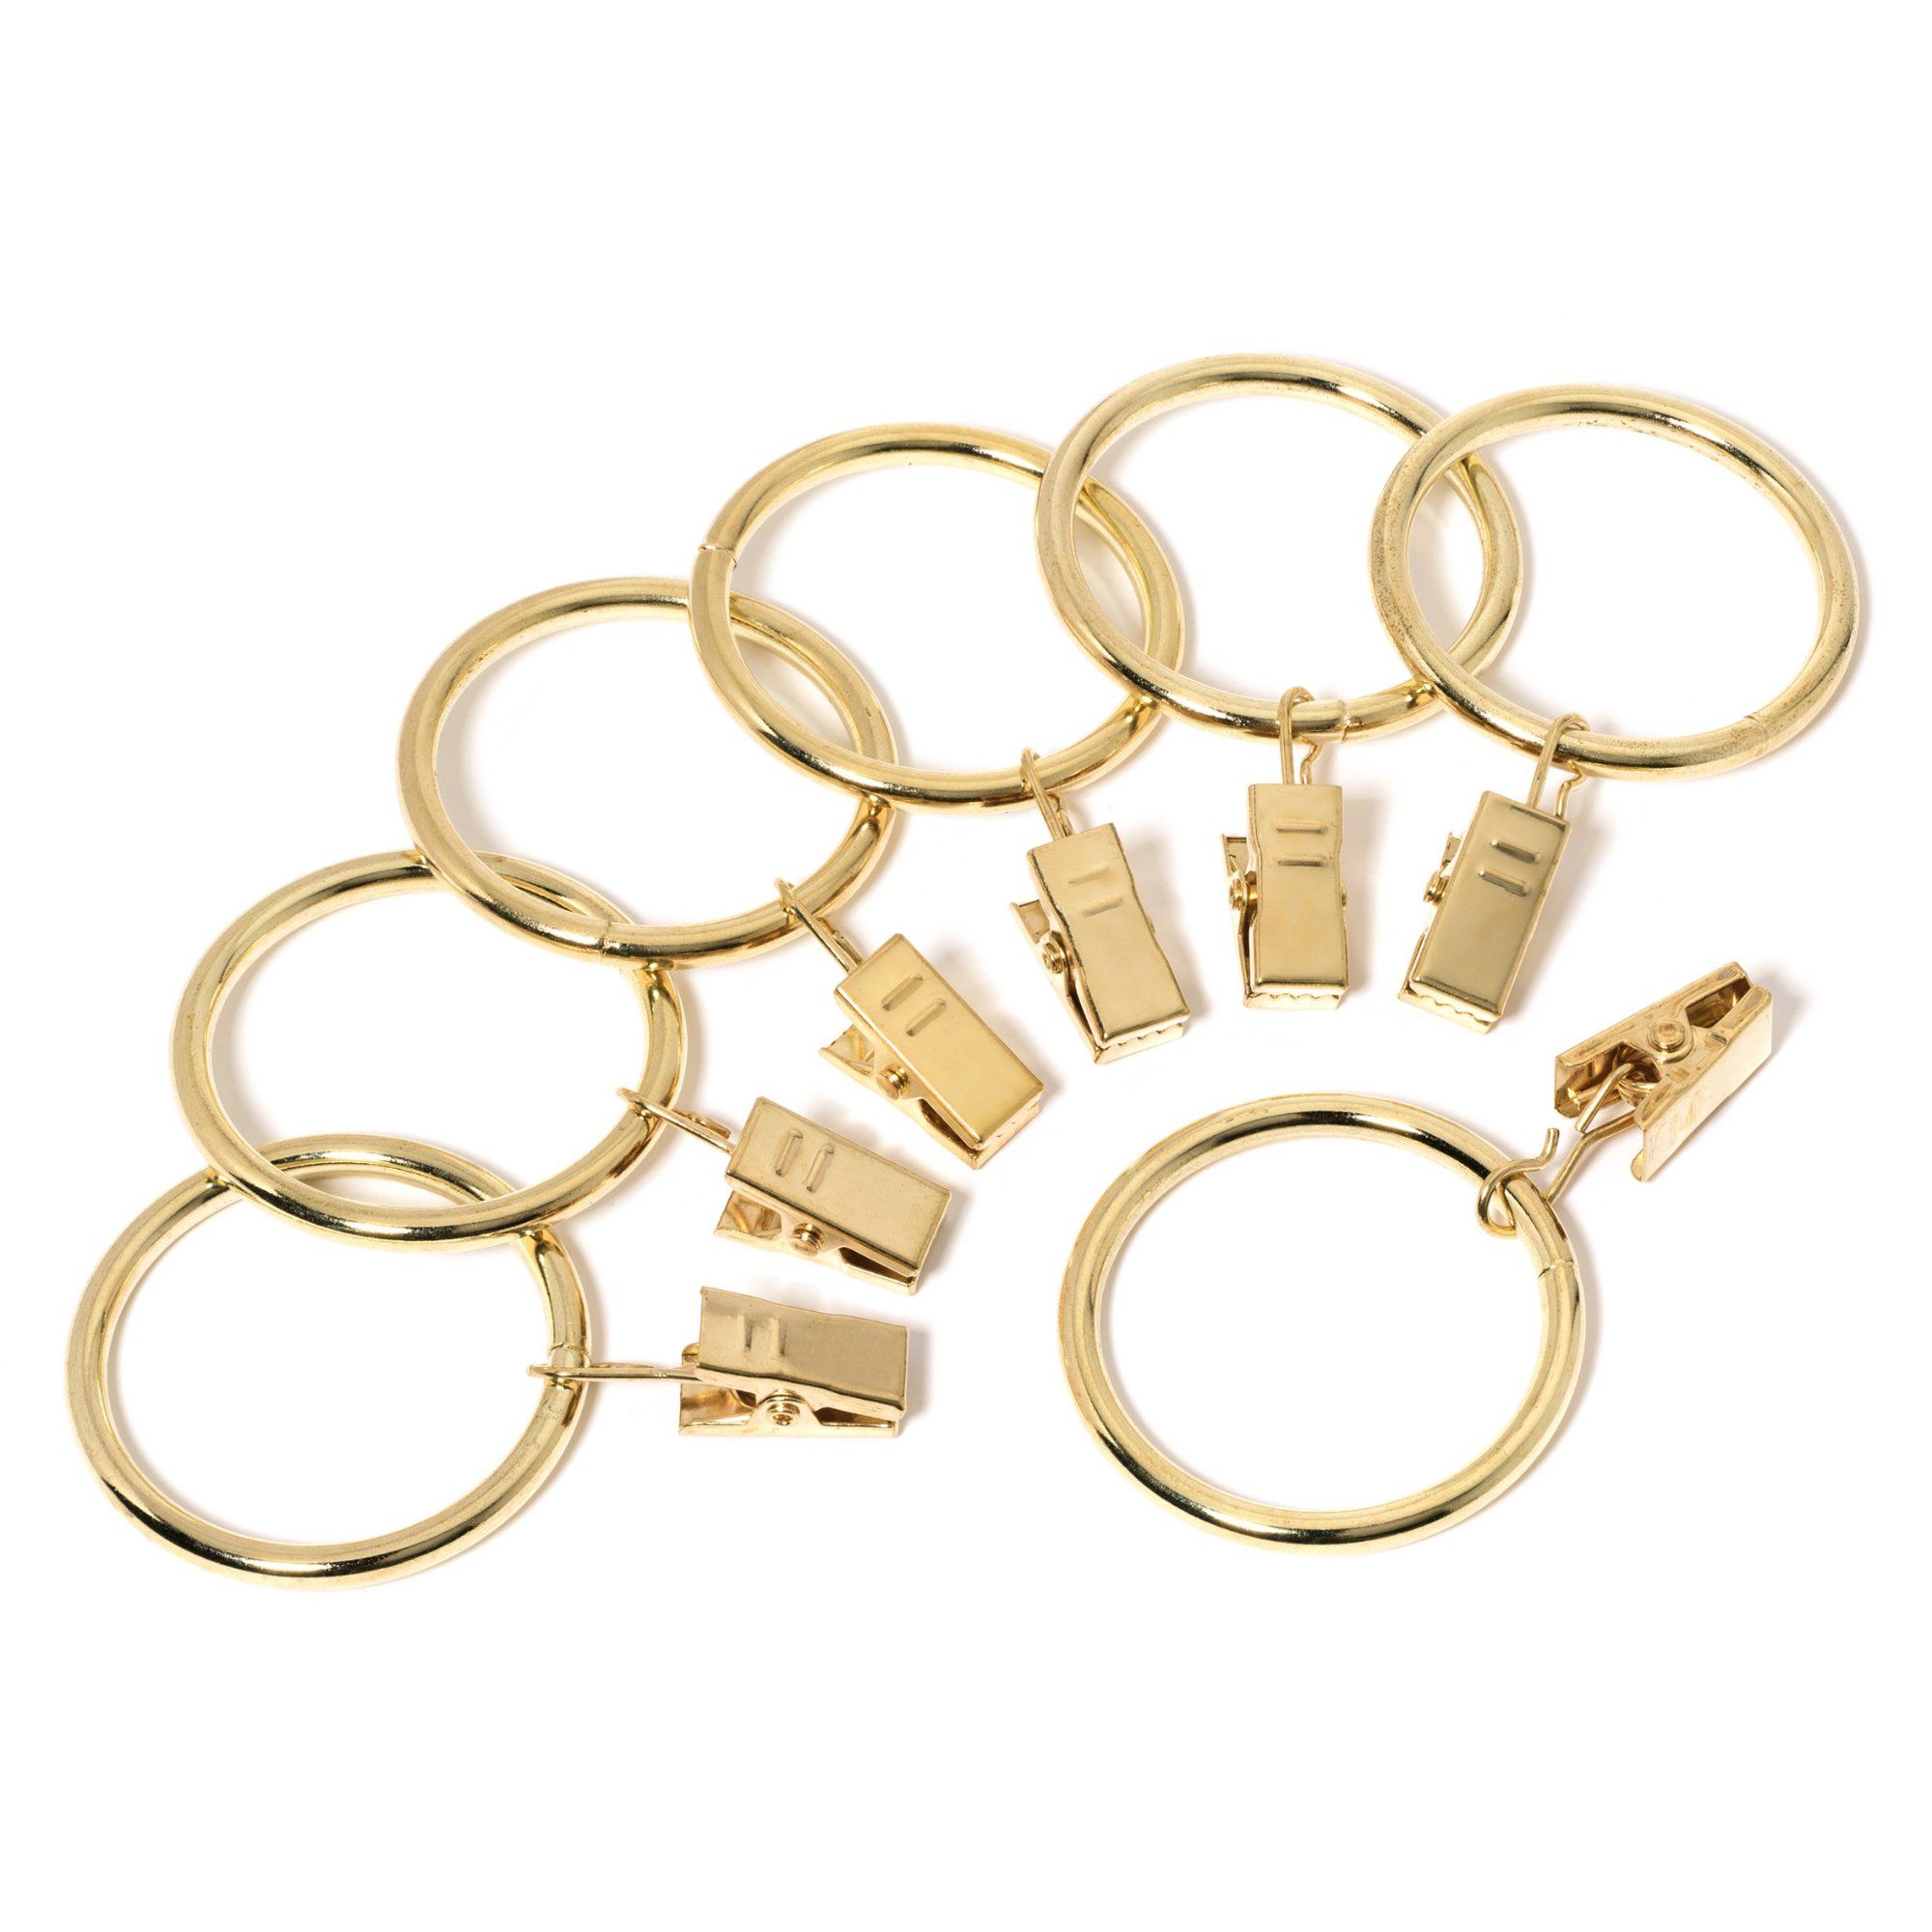 1.5 Inch Metal Curtain Clip Rings in Gold Finish, Set of 50 | Walmart (US)